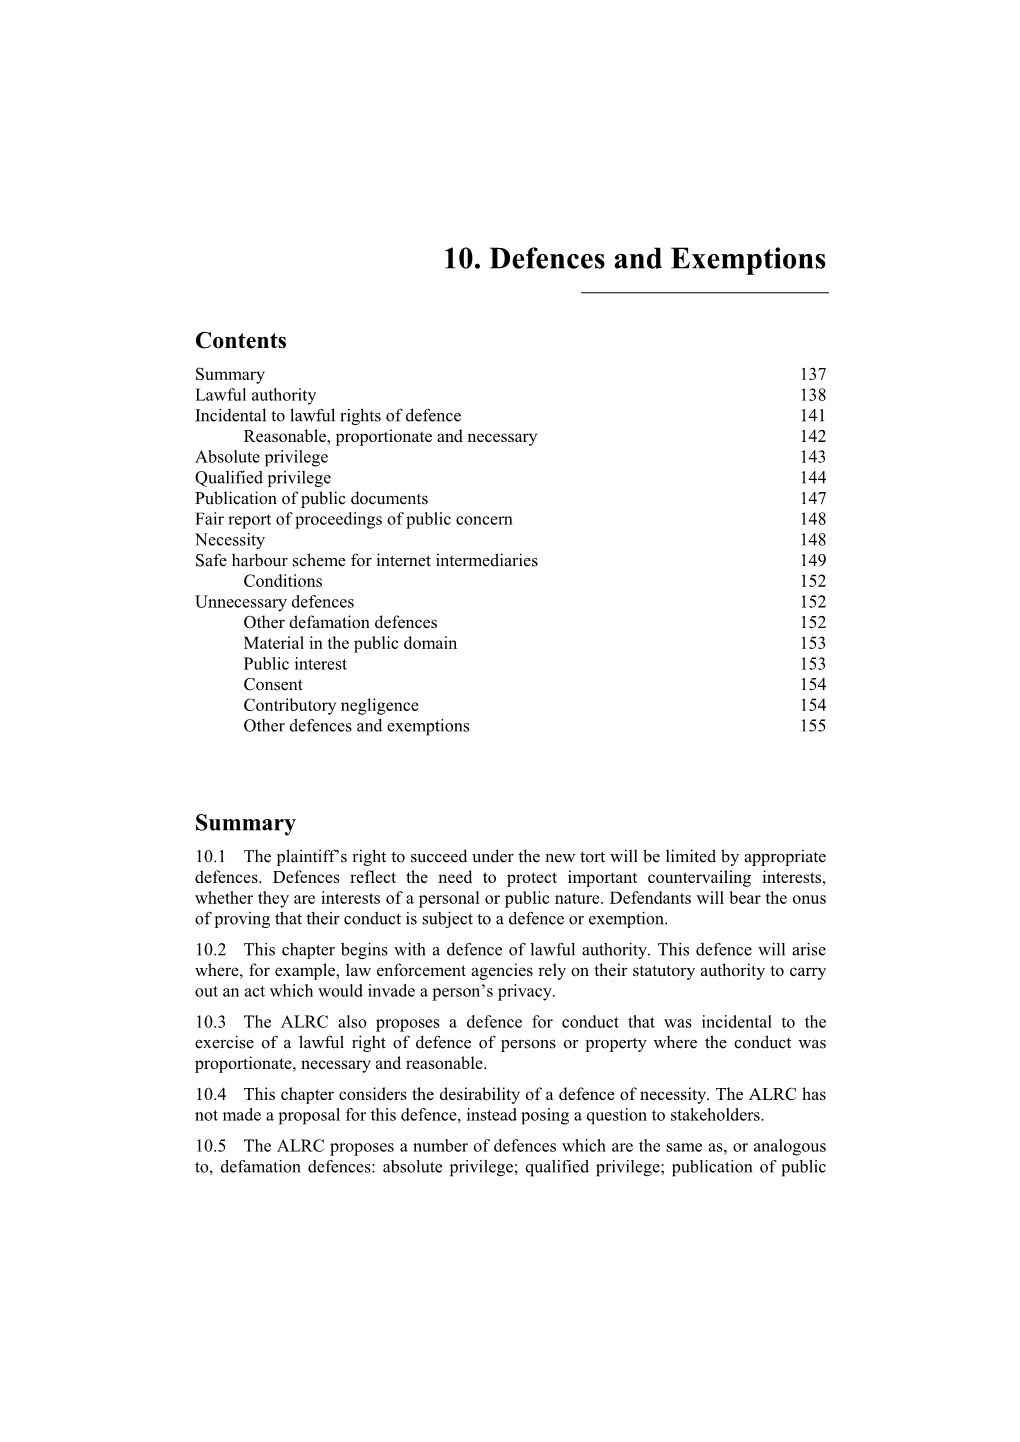 10. Defences and Exemptions